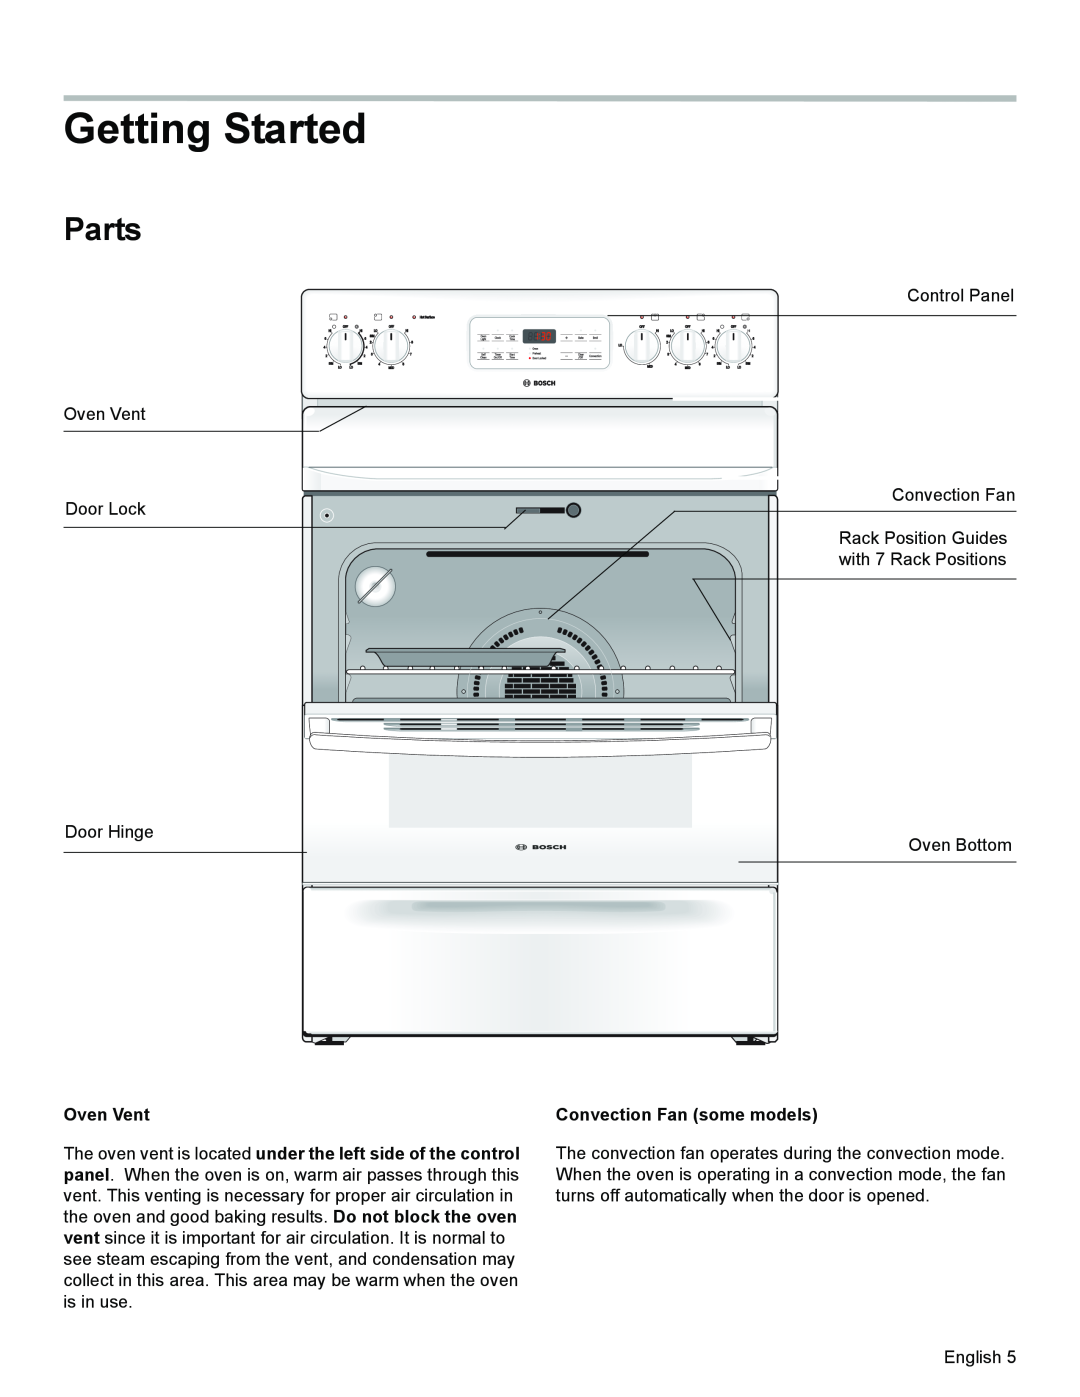 Bosch Appliances HES3053U manual Getting Started, Parts, Oven Vent, Convection Fan some models 